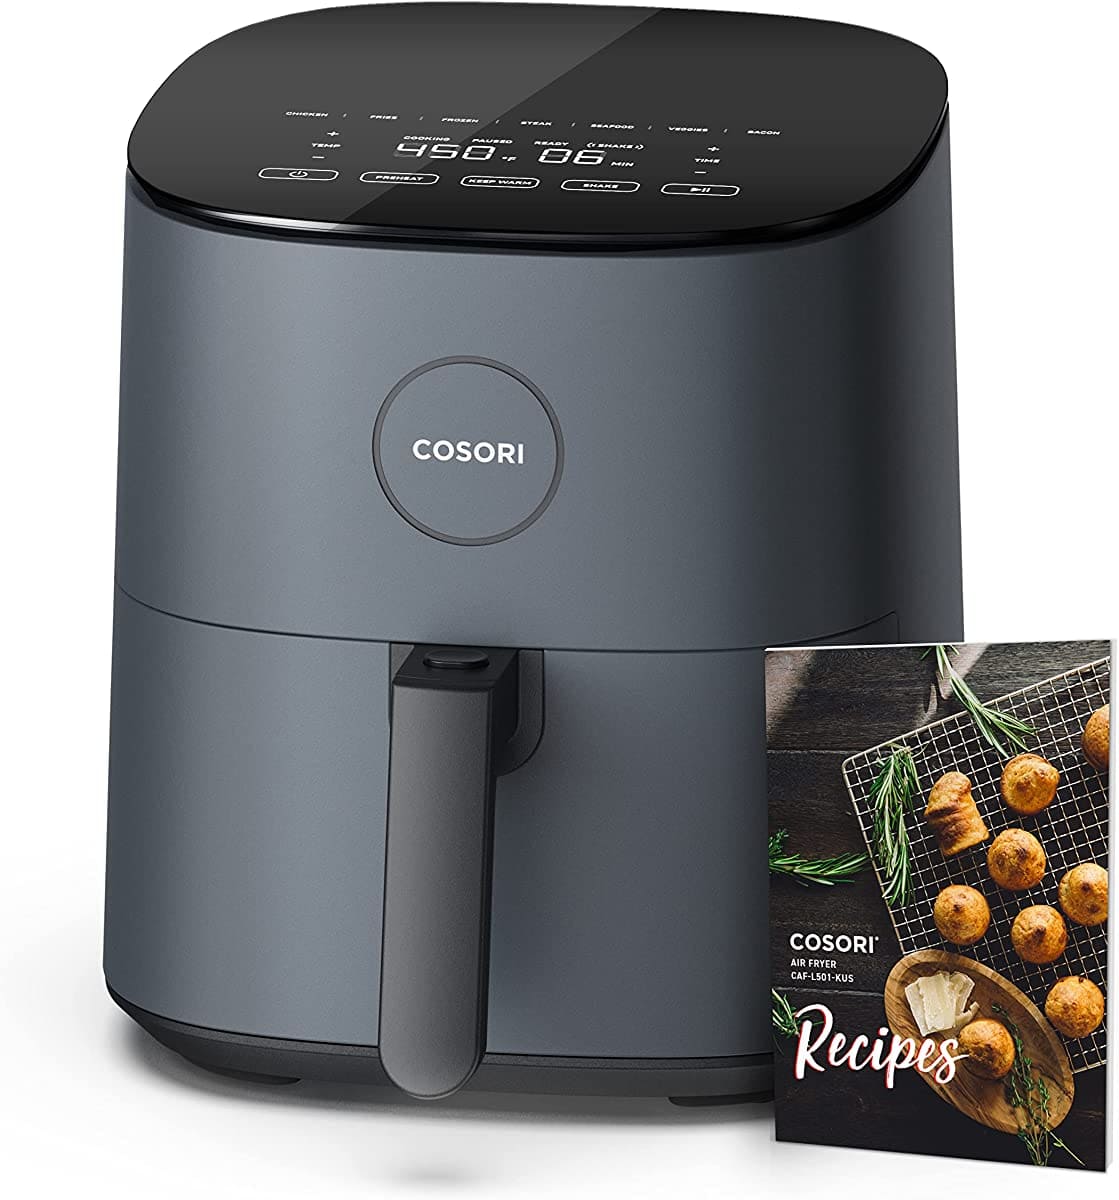 COSORI Air Fryer 5 QT by Amazon